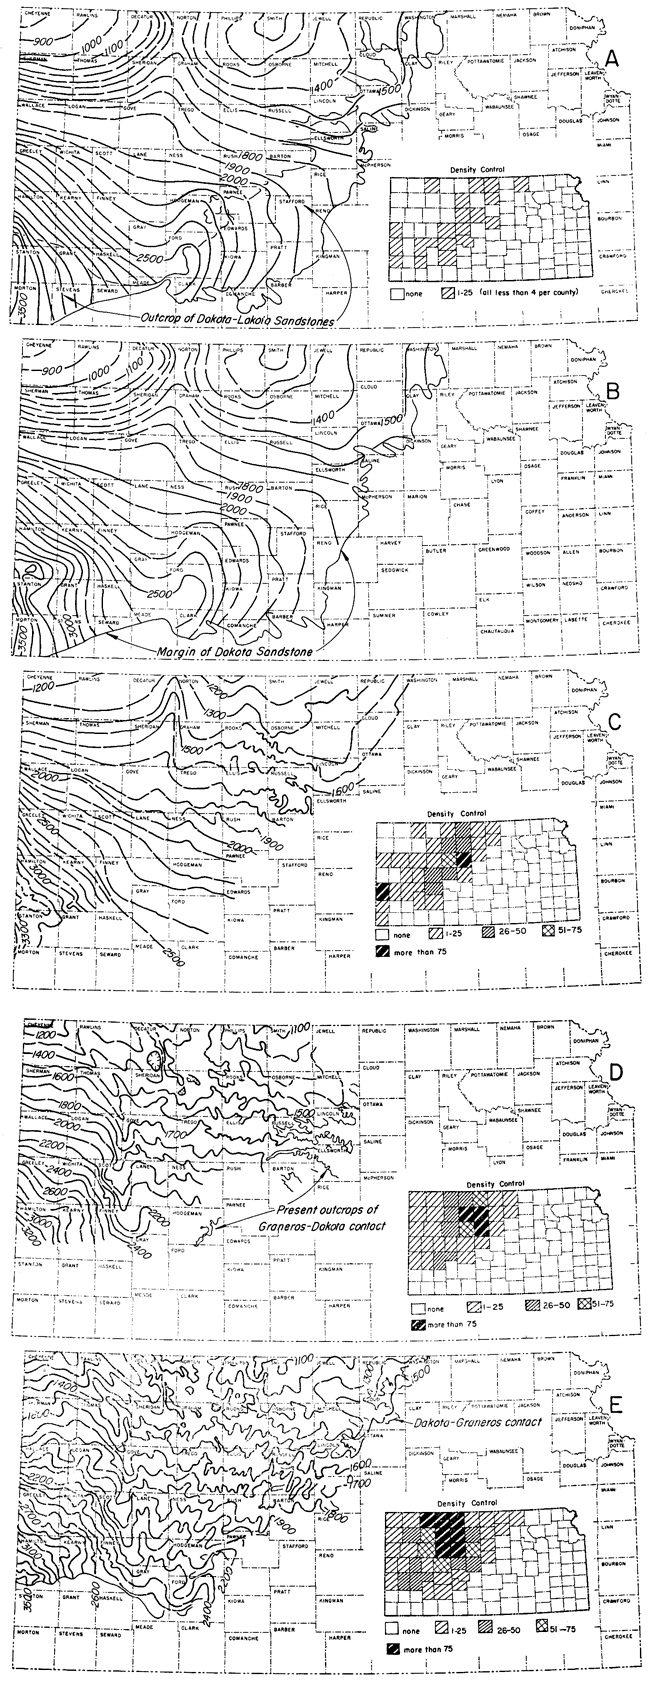 Five maps of Kansas showing different interpretations of the structure of the Cretaceous.